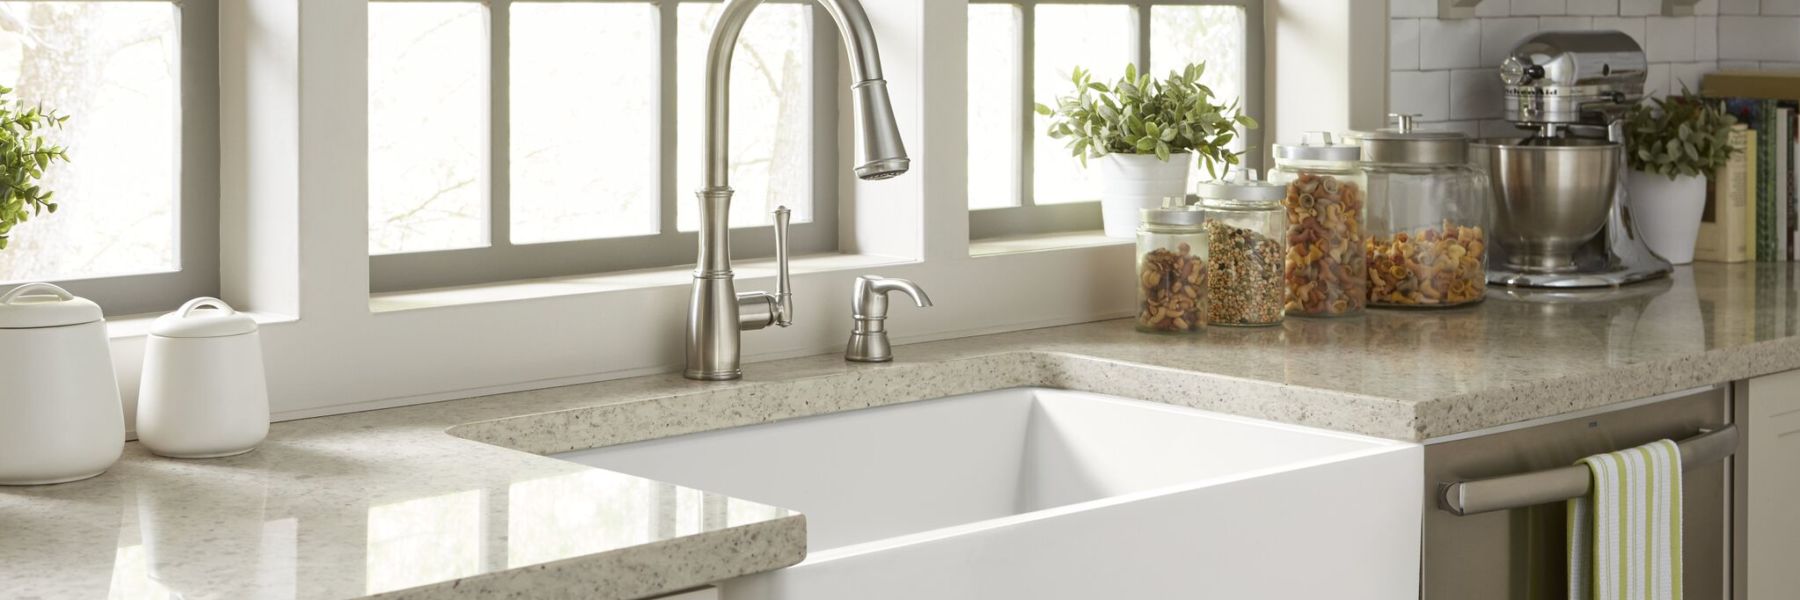 types of kitchen sink material